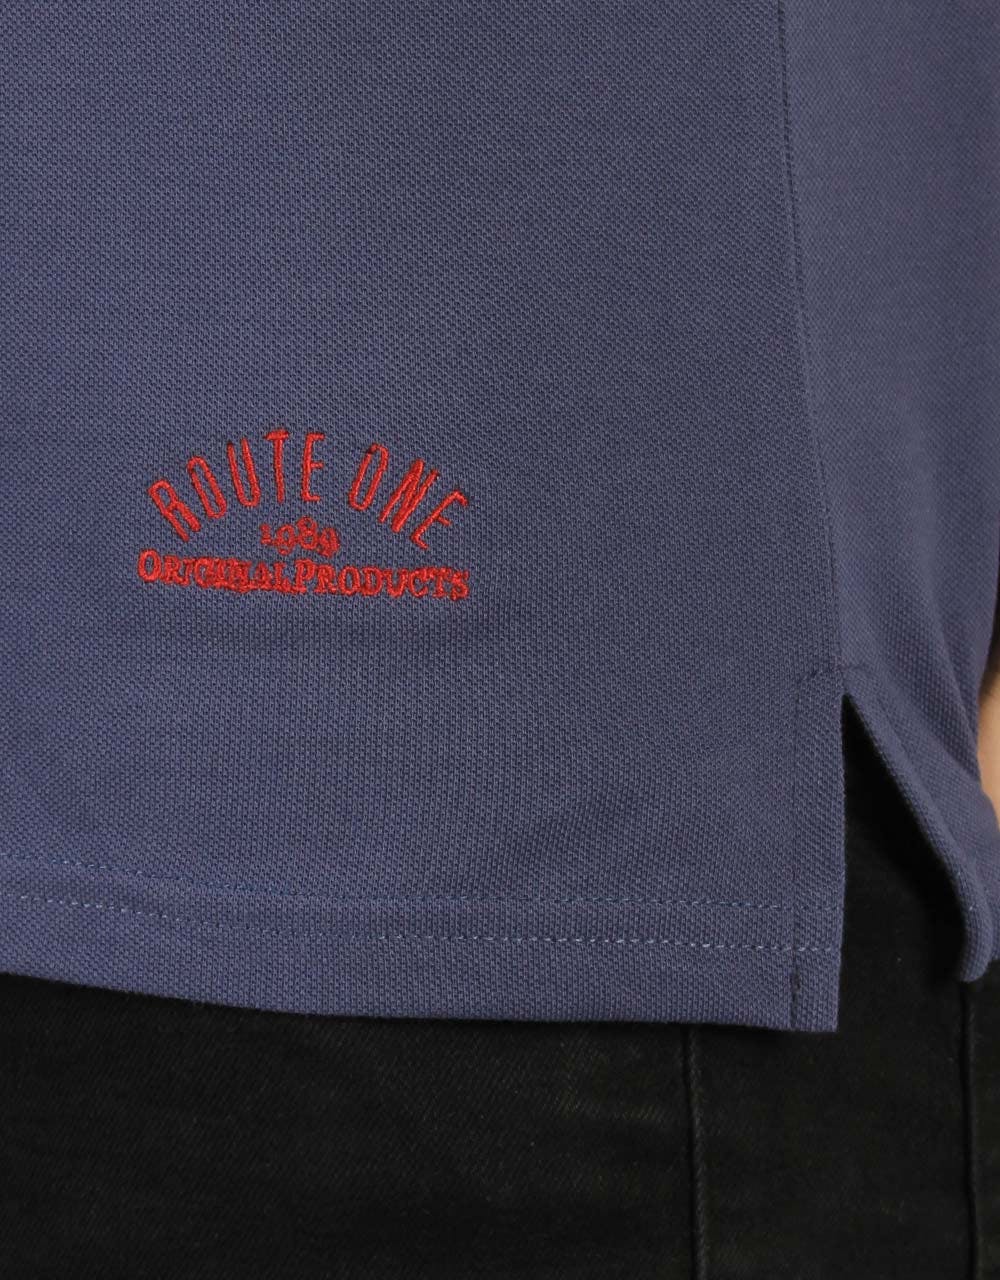 Route One Polo Shirt - Blue